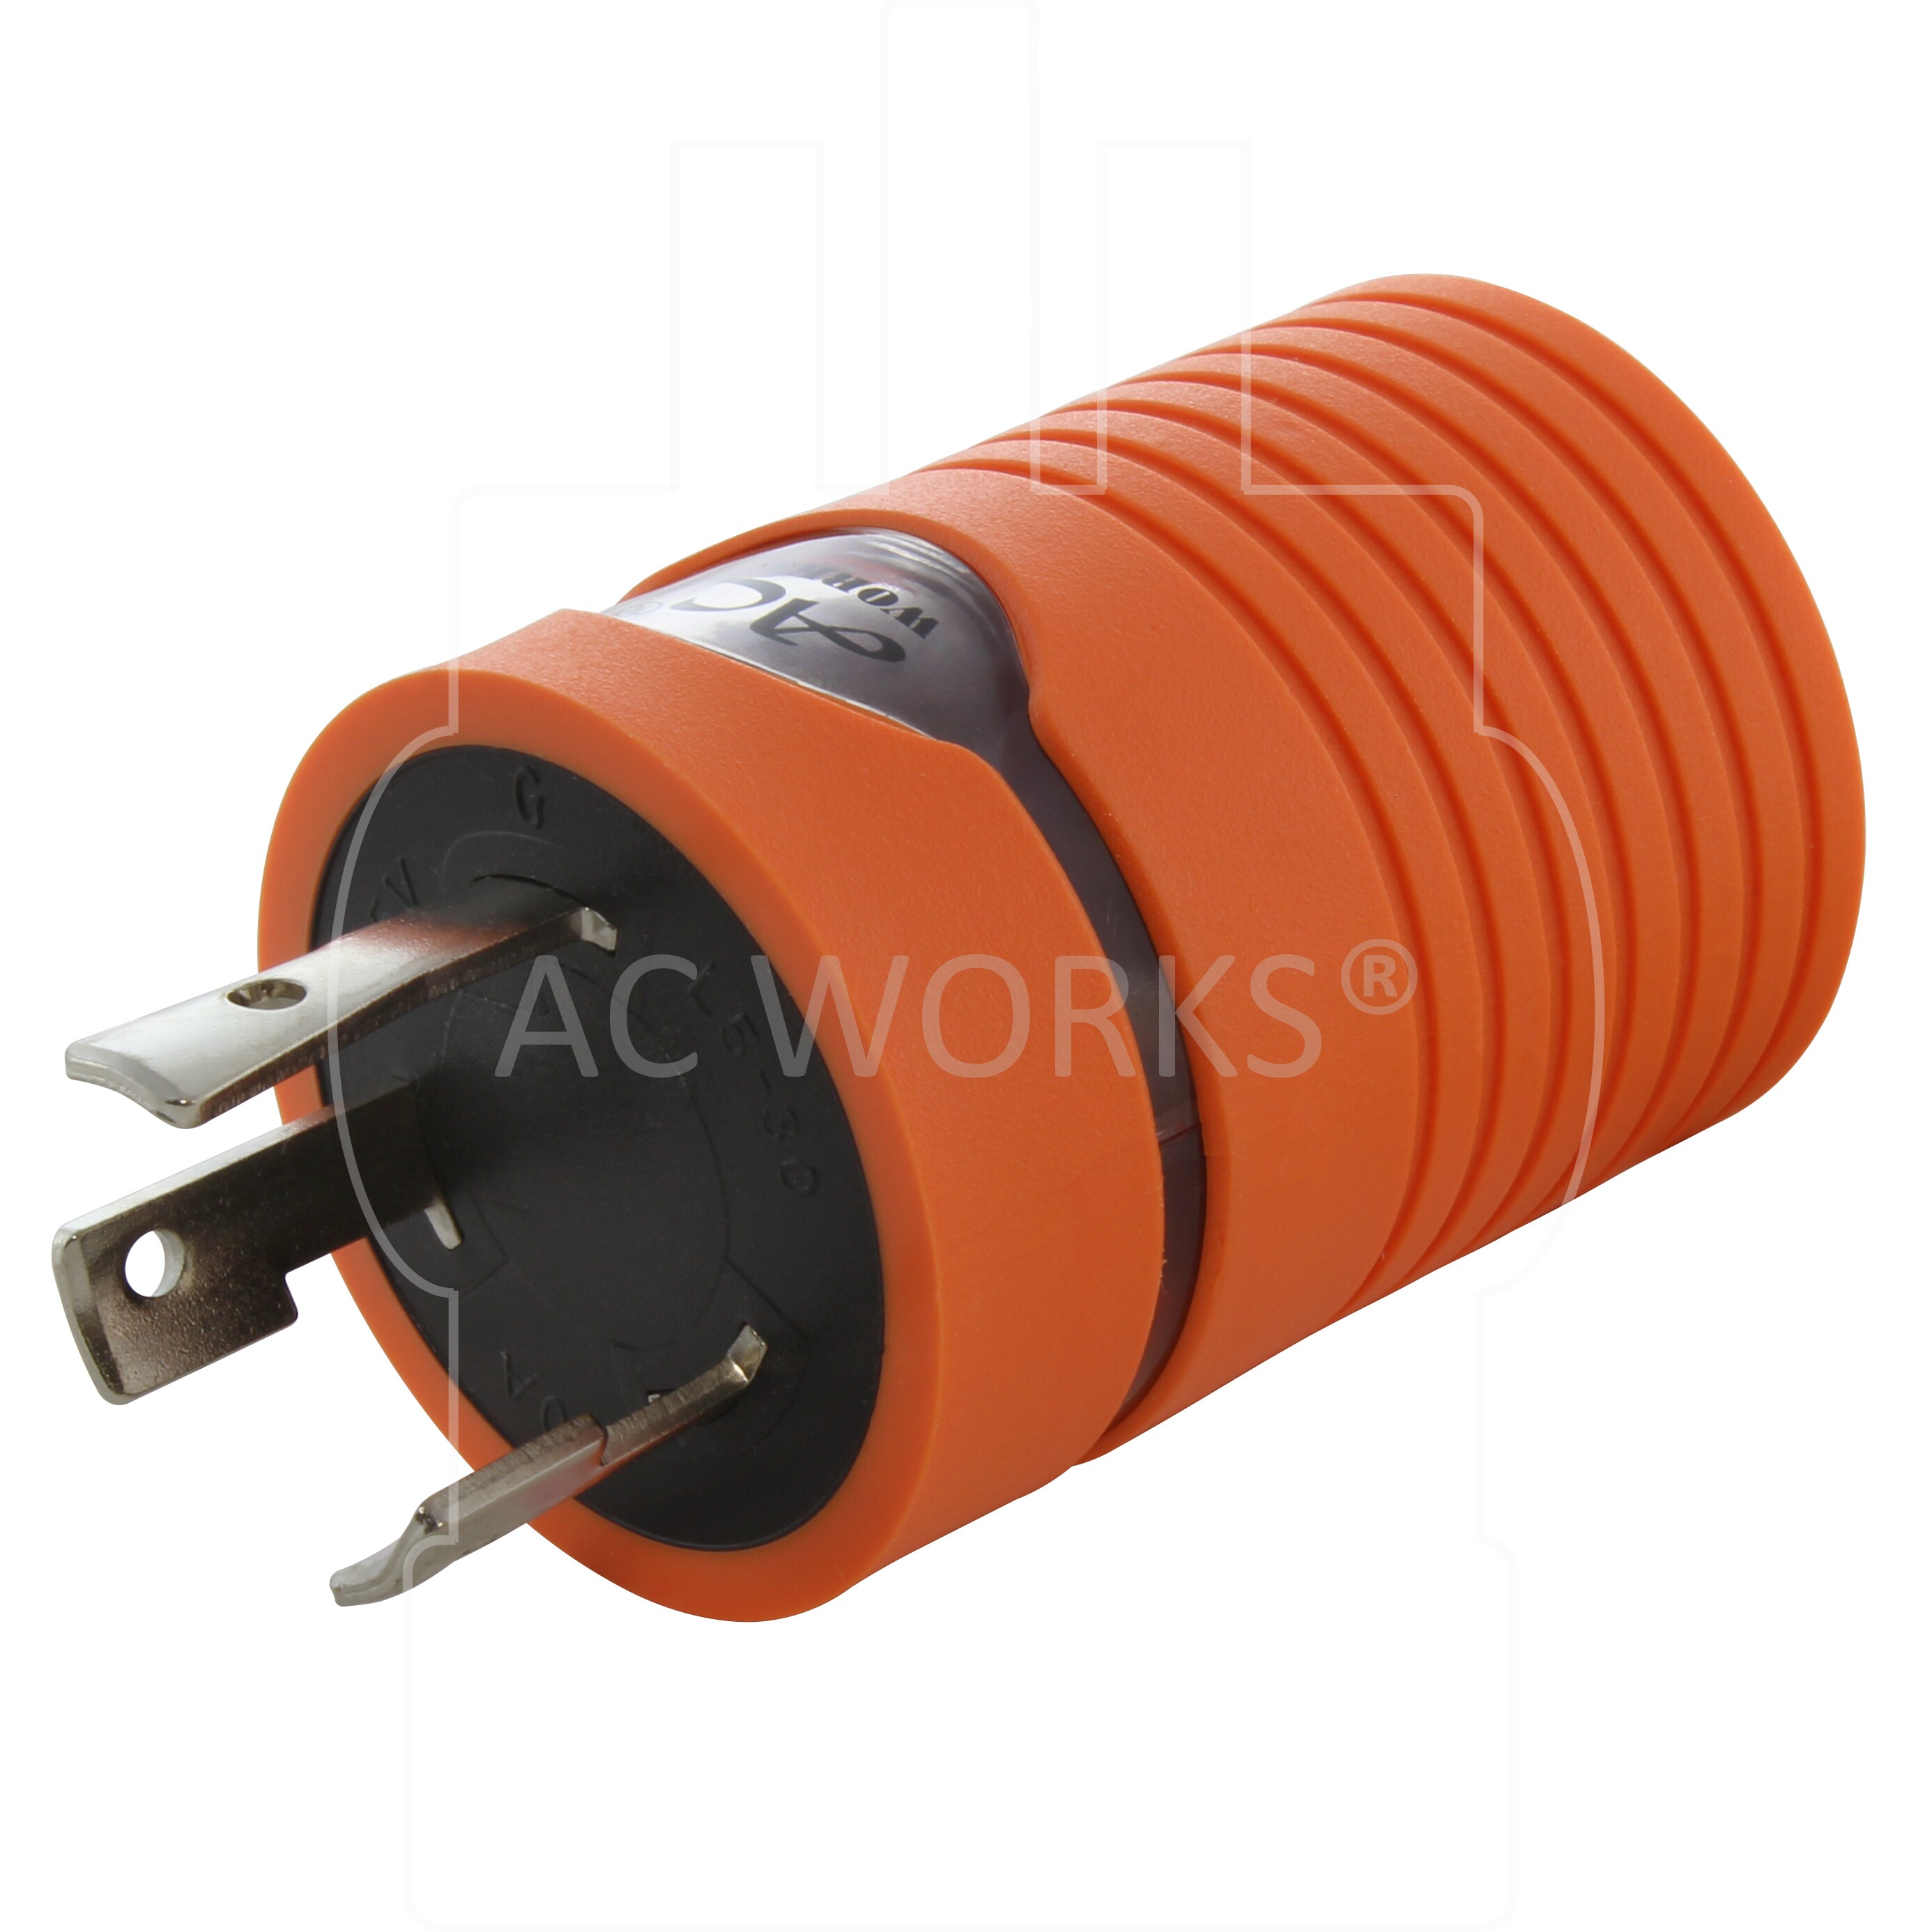 30 Amp NEMA L5-30 Male to 30 AmpNEMA L14-30 Female Adapter Cord by AC WORKS™ 